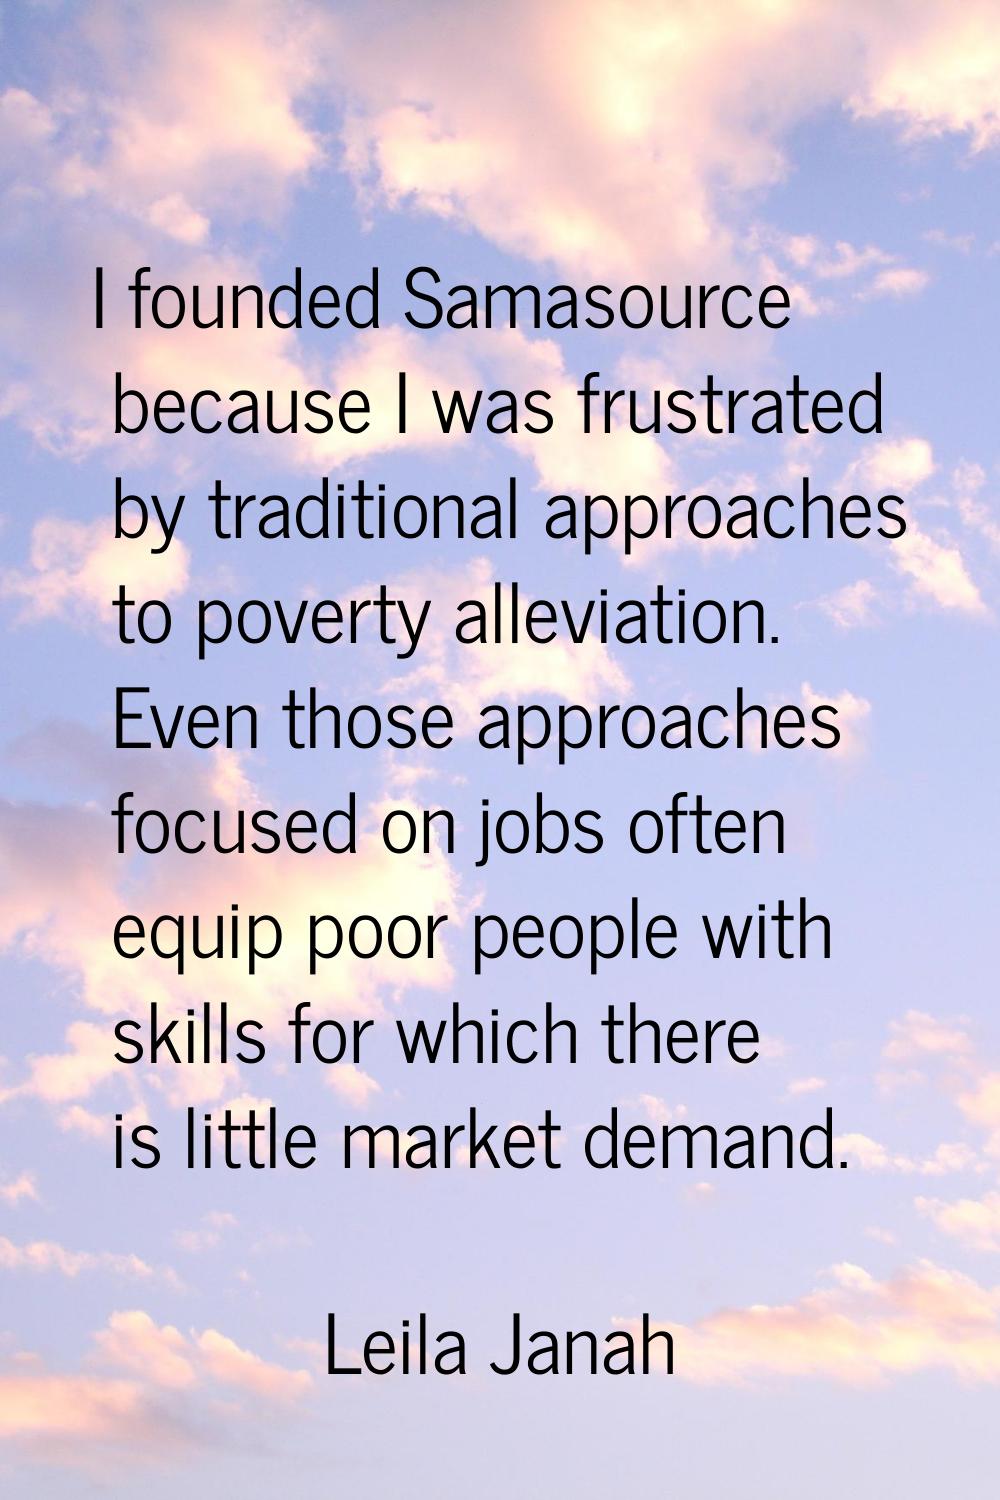 I founded Samasource because I was frustrated by traditional approaches to poverty alleviation. Eve